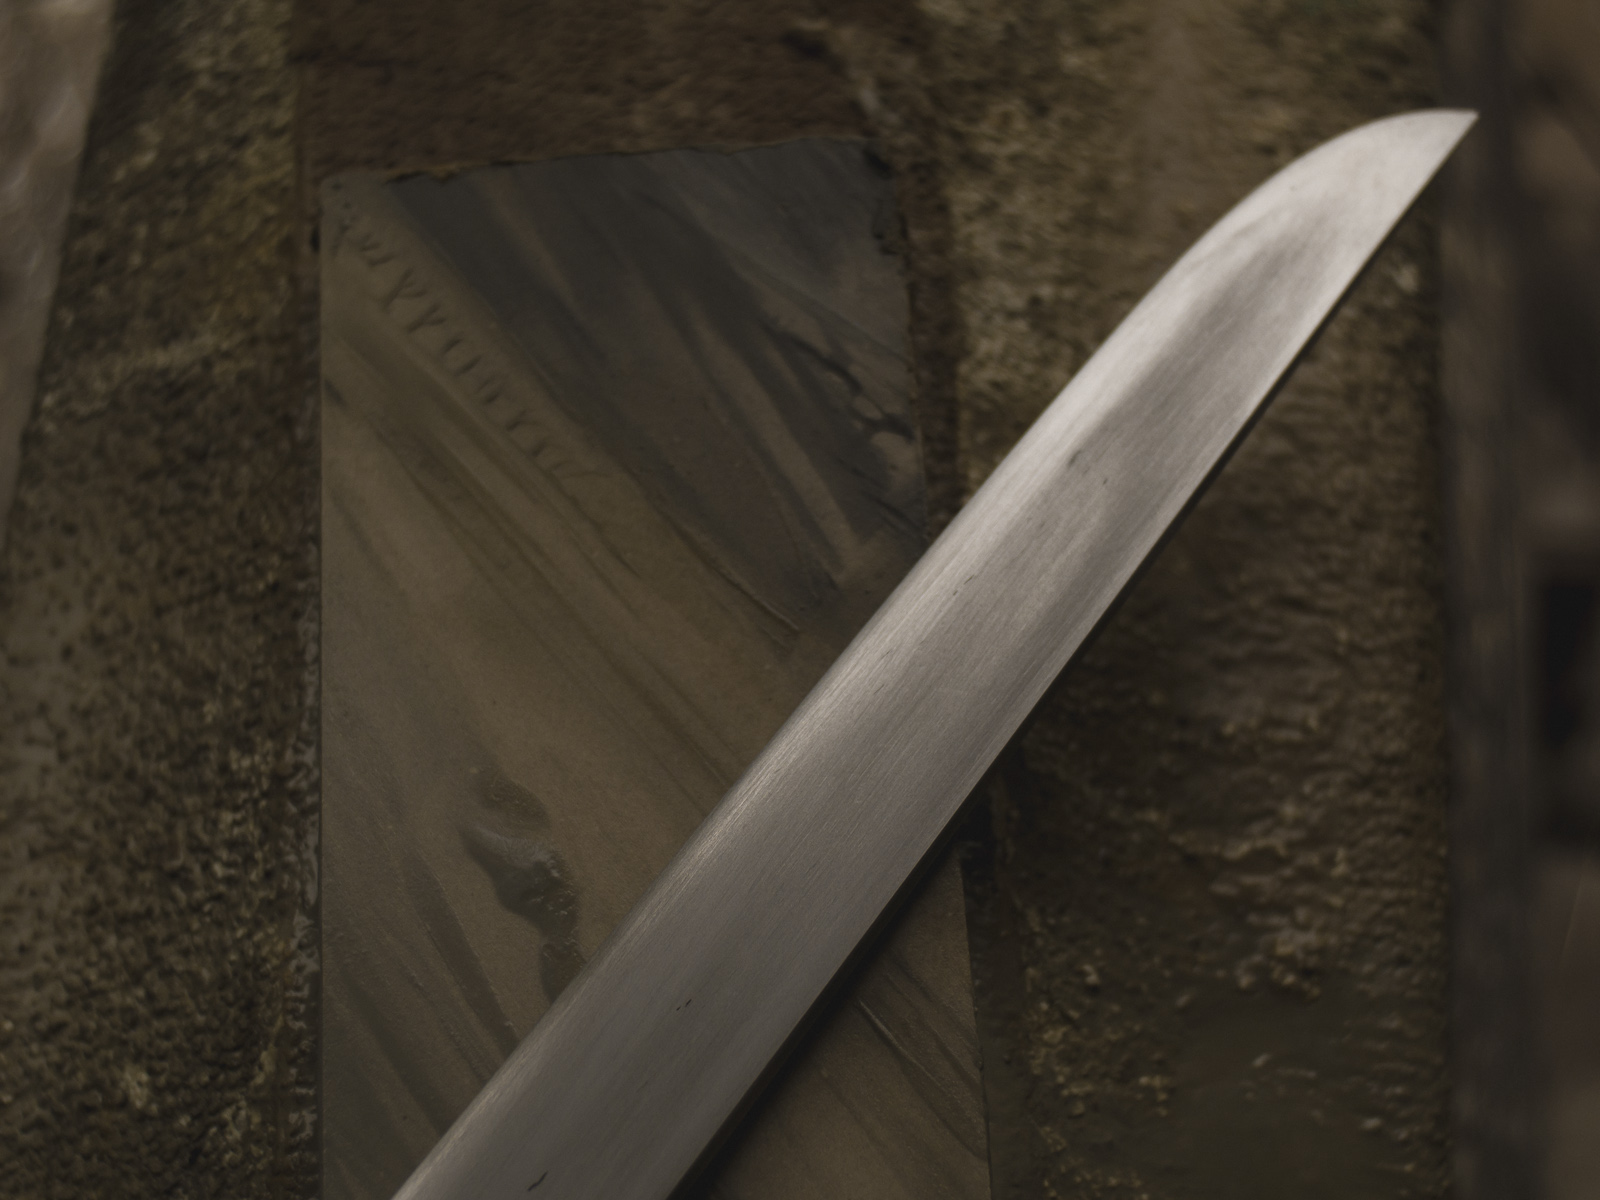 Island Blacksmith: Hand forged tanto made from reclaimed and natural materials using traditional techniques